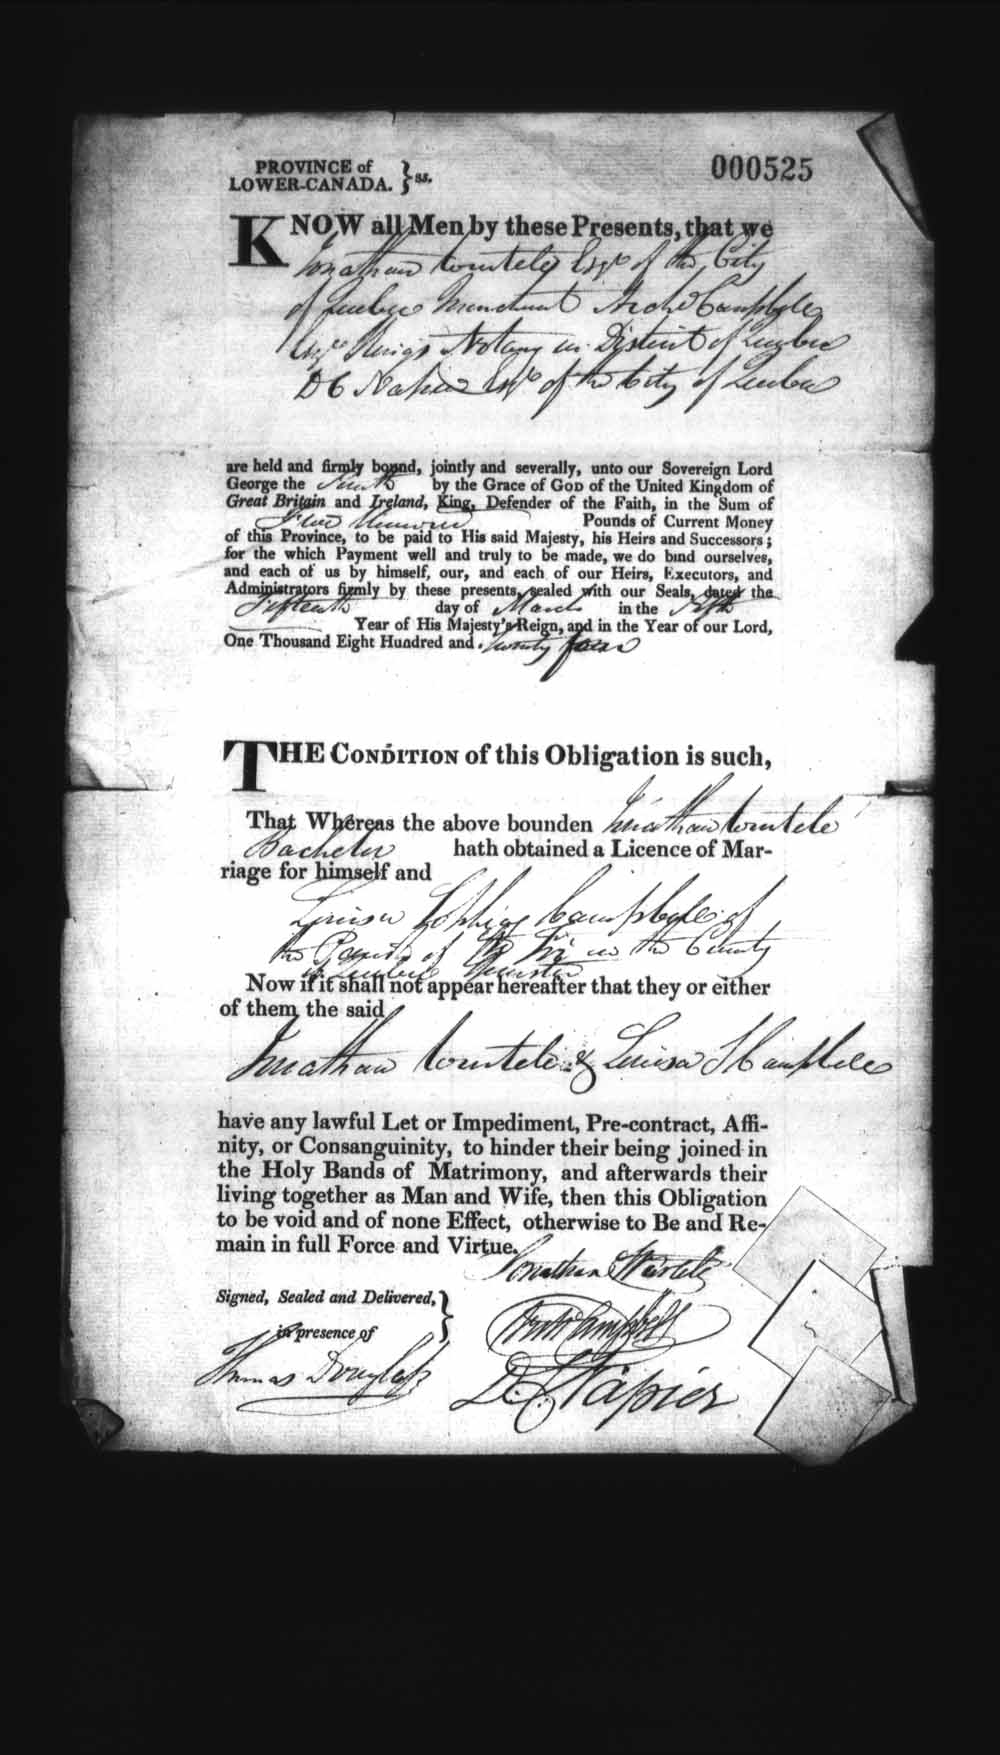 Digitized page of Upper and Lower Canada Marriage Bonds (1779-1865) for Image No.: e008236447